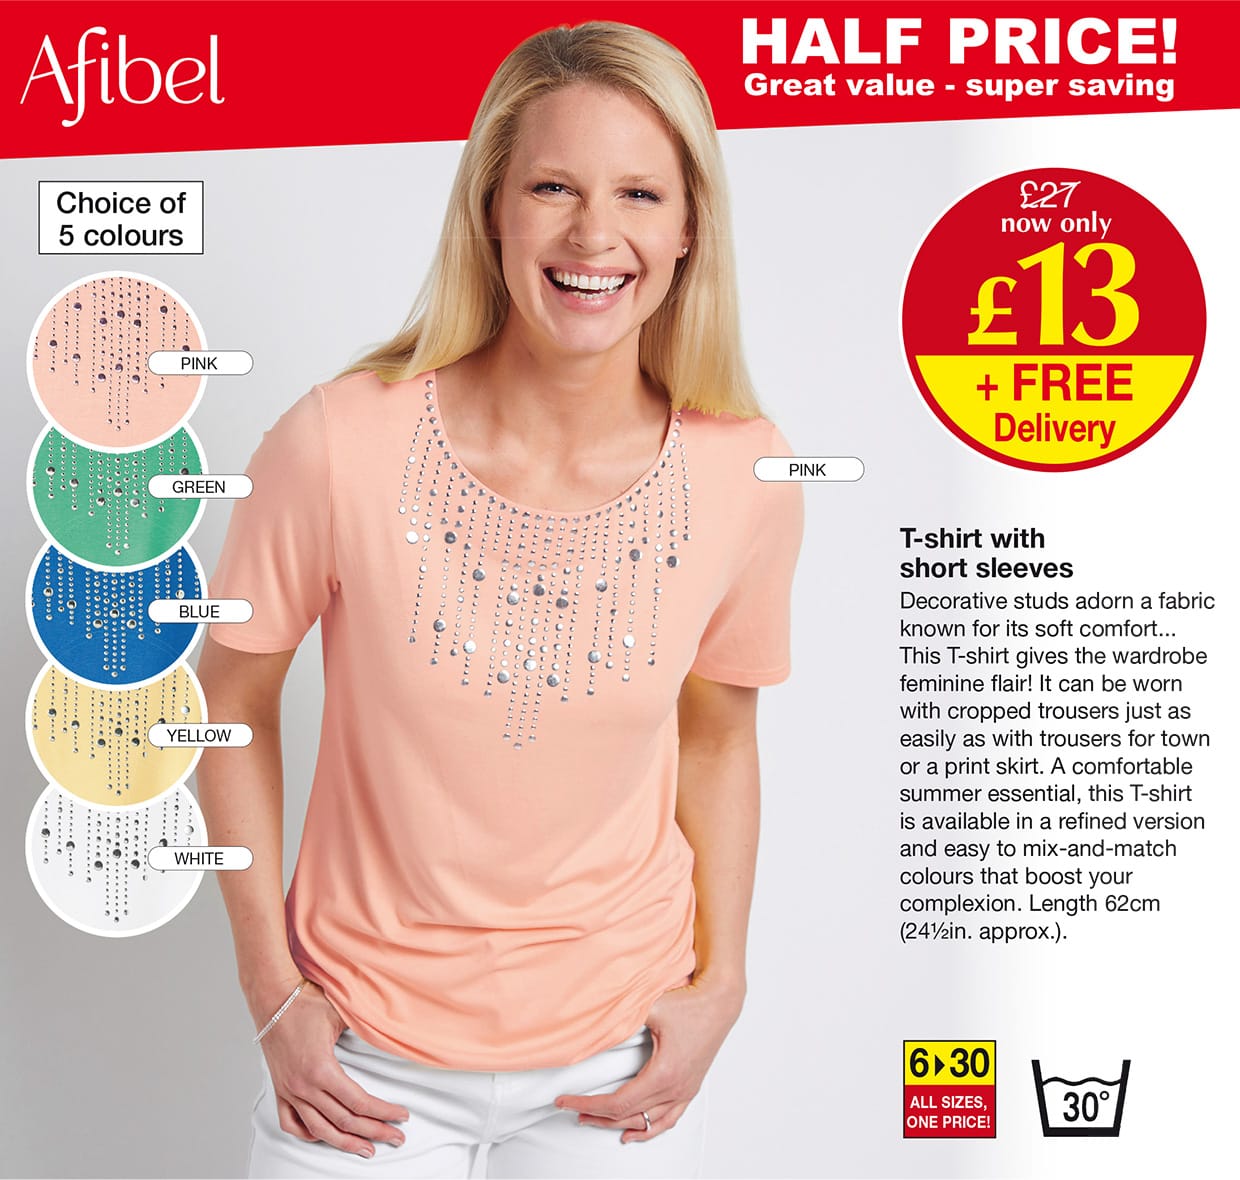 BESTSELLER - T-shirt with short sleeves: Half Price, was £27, now only £13 + free delivery